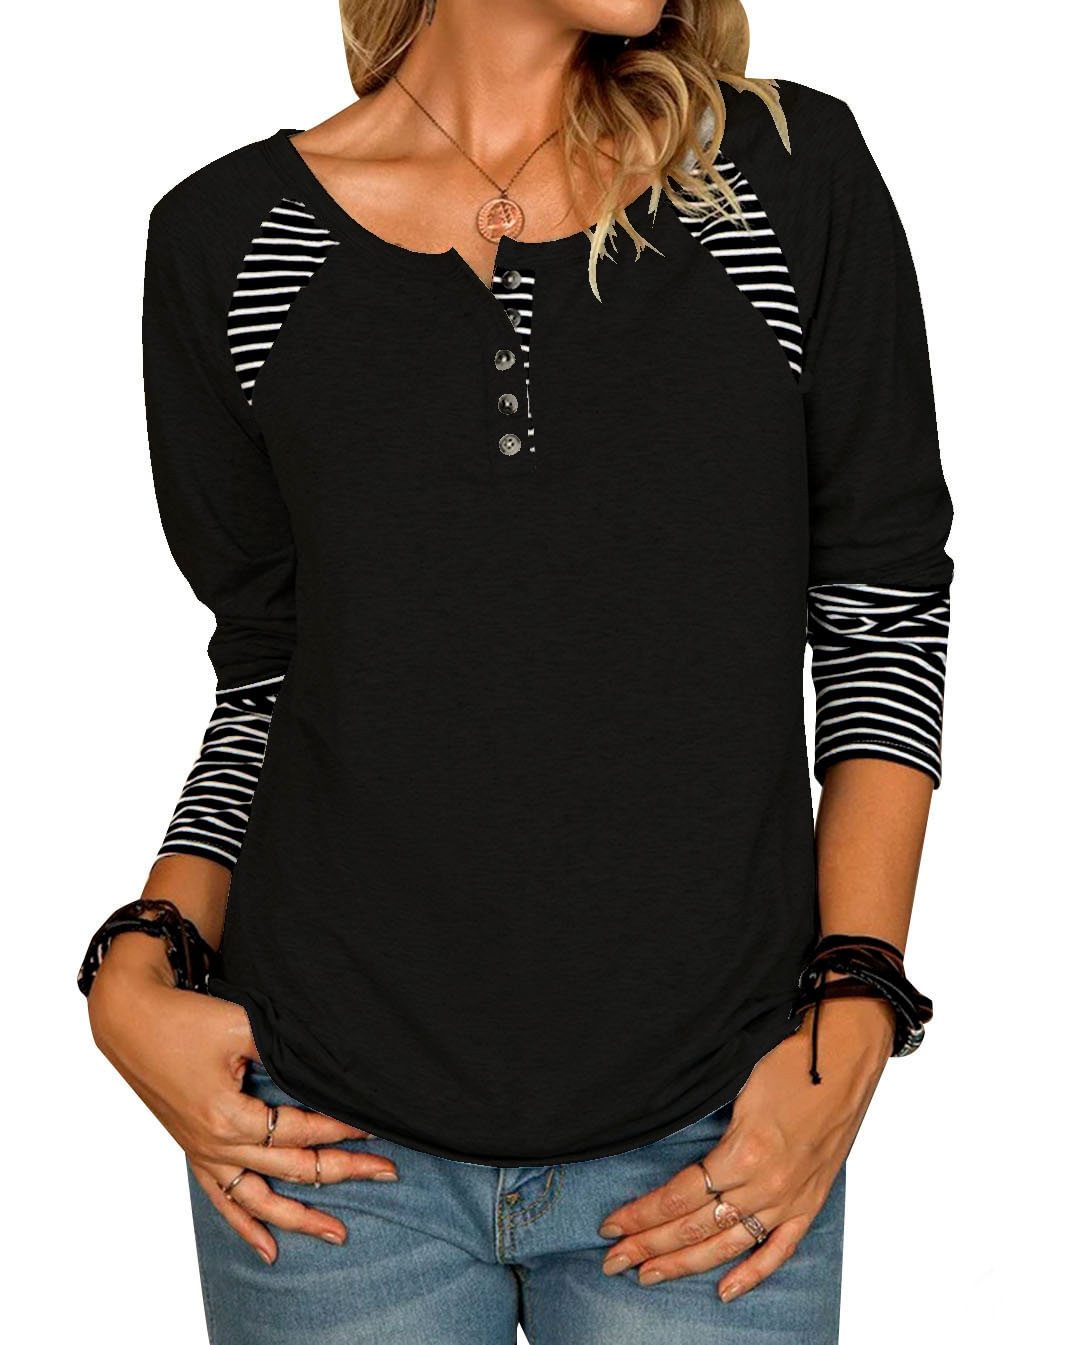 Striped casual T-shirt top